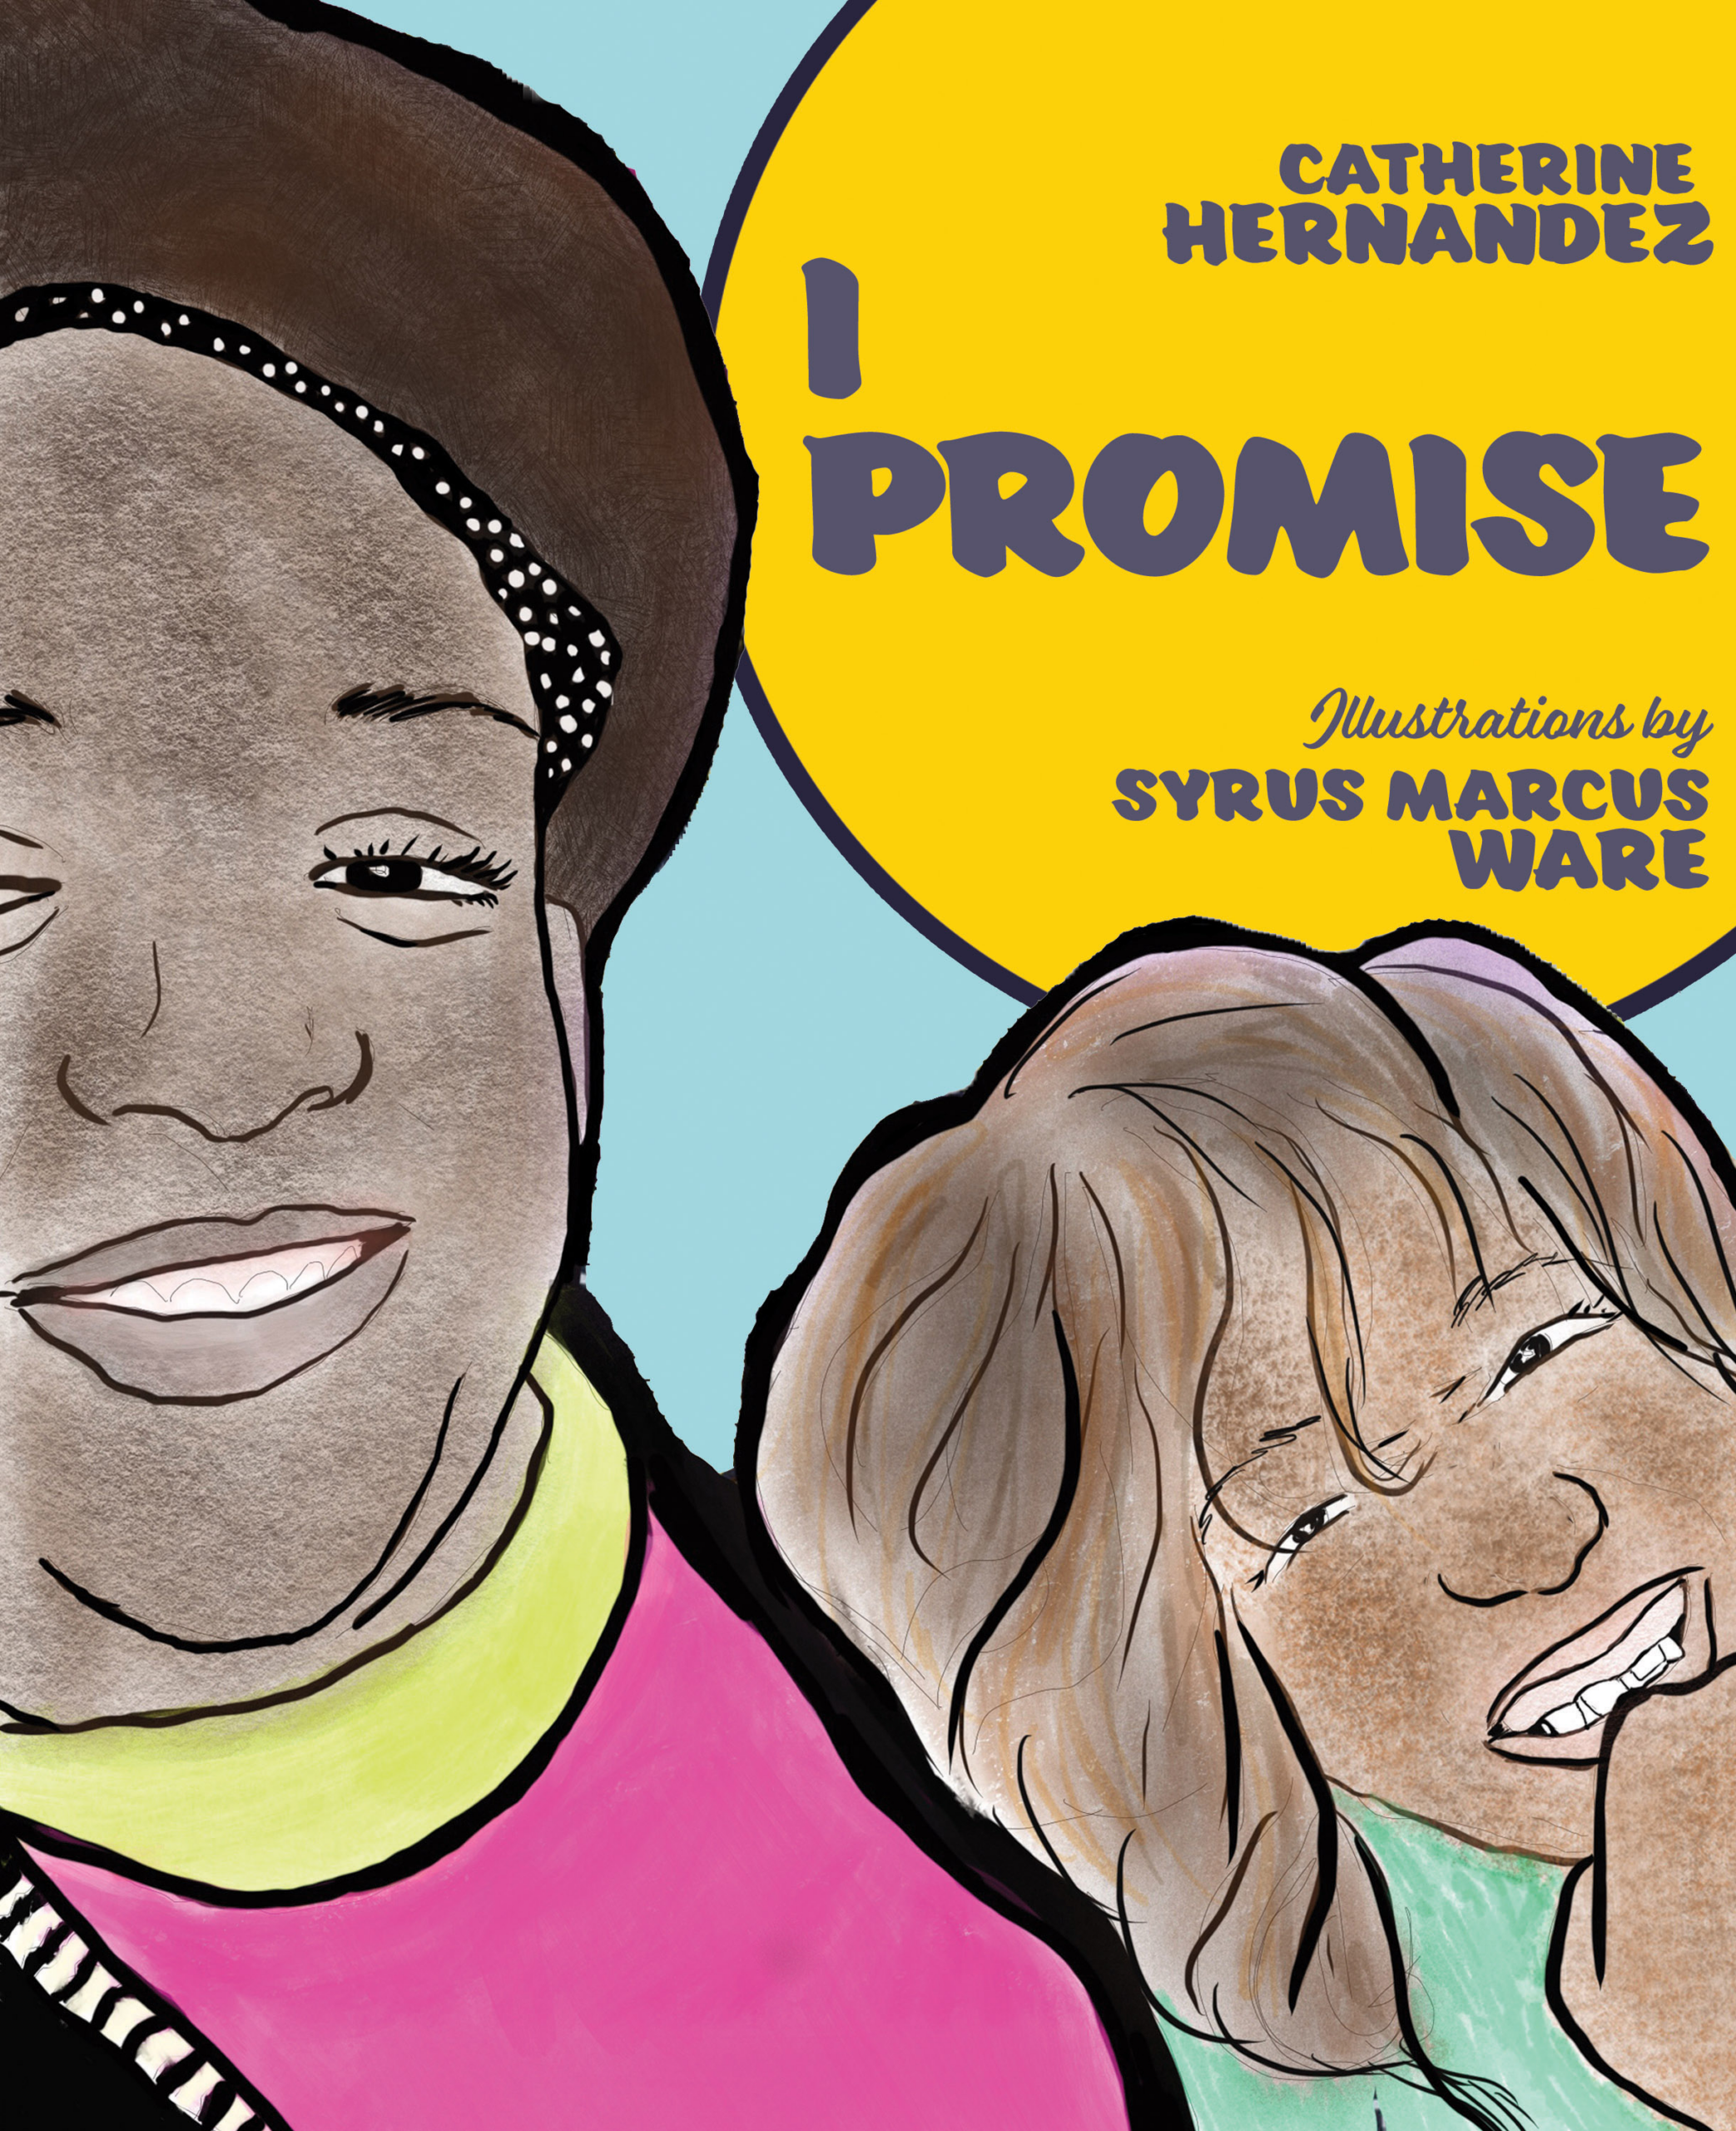 The cover of I Promise by Catherine Hernandez.